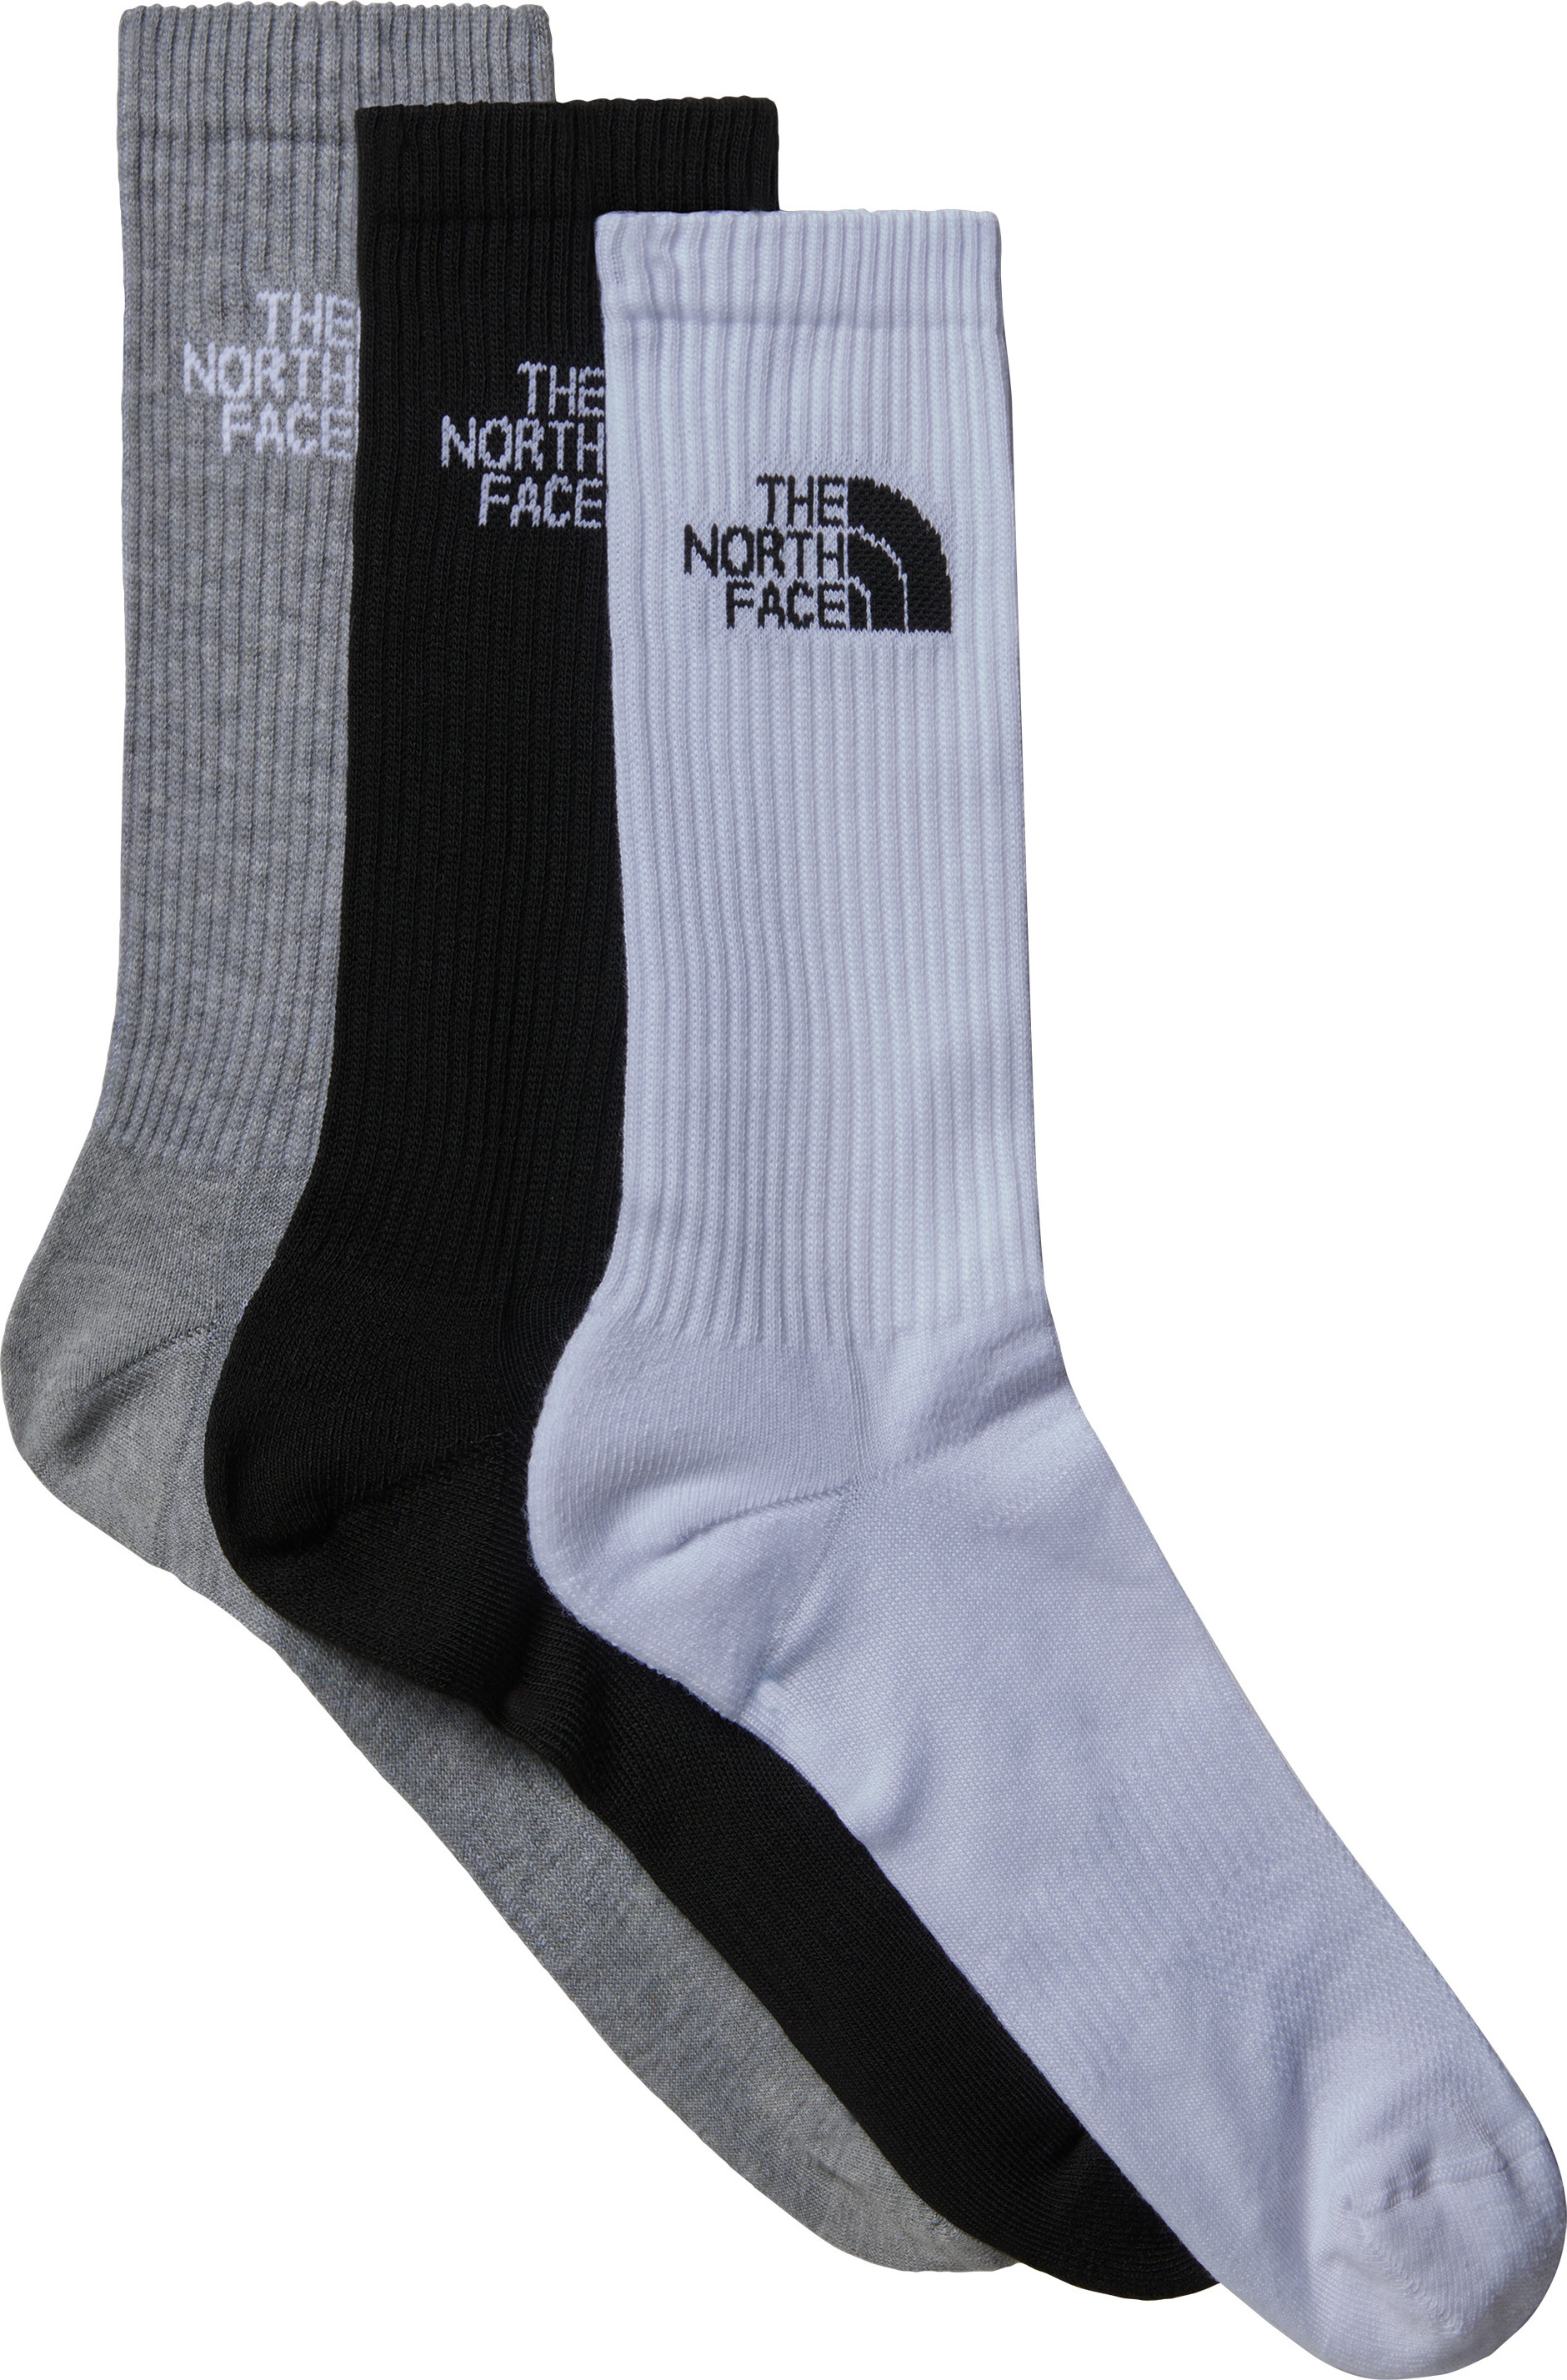 The North Face Multi Sport Cushion Crew Socks 3-Pack Black Assorted